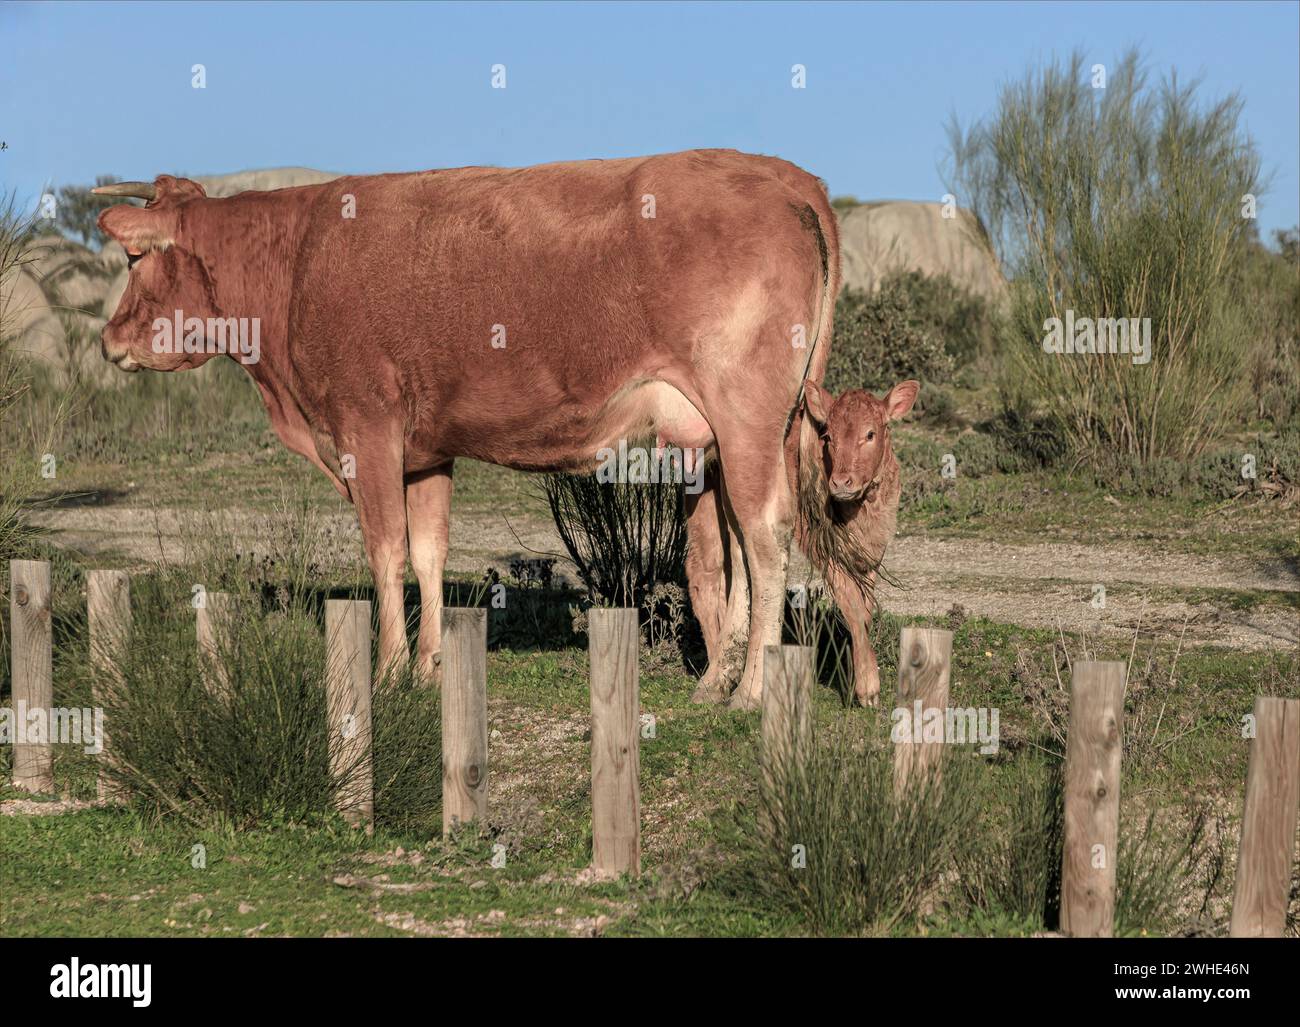 Cow with a calf peeping out from behind her legs roaming freeon common ground ofva national park in spain Stock Photo